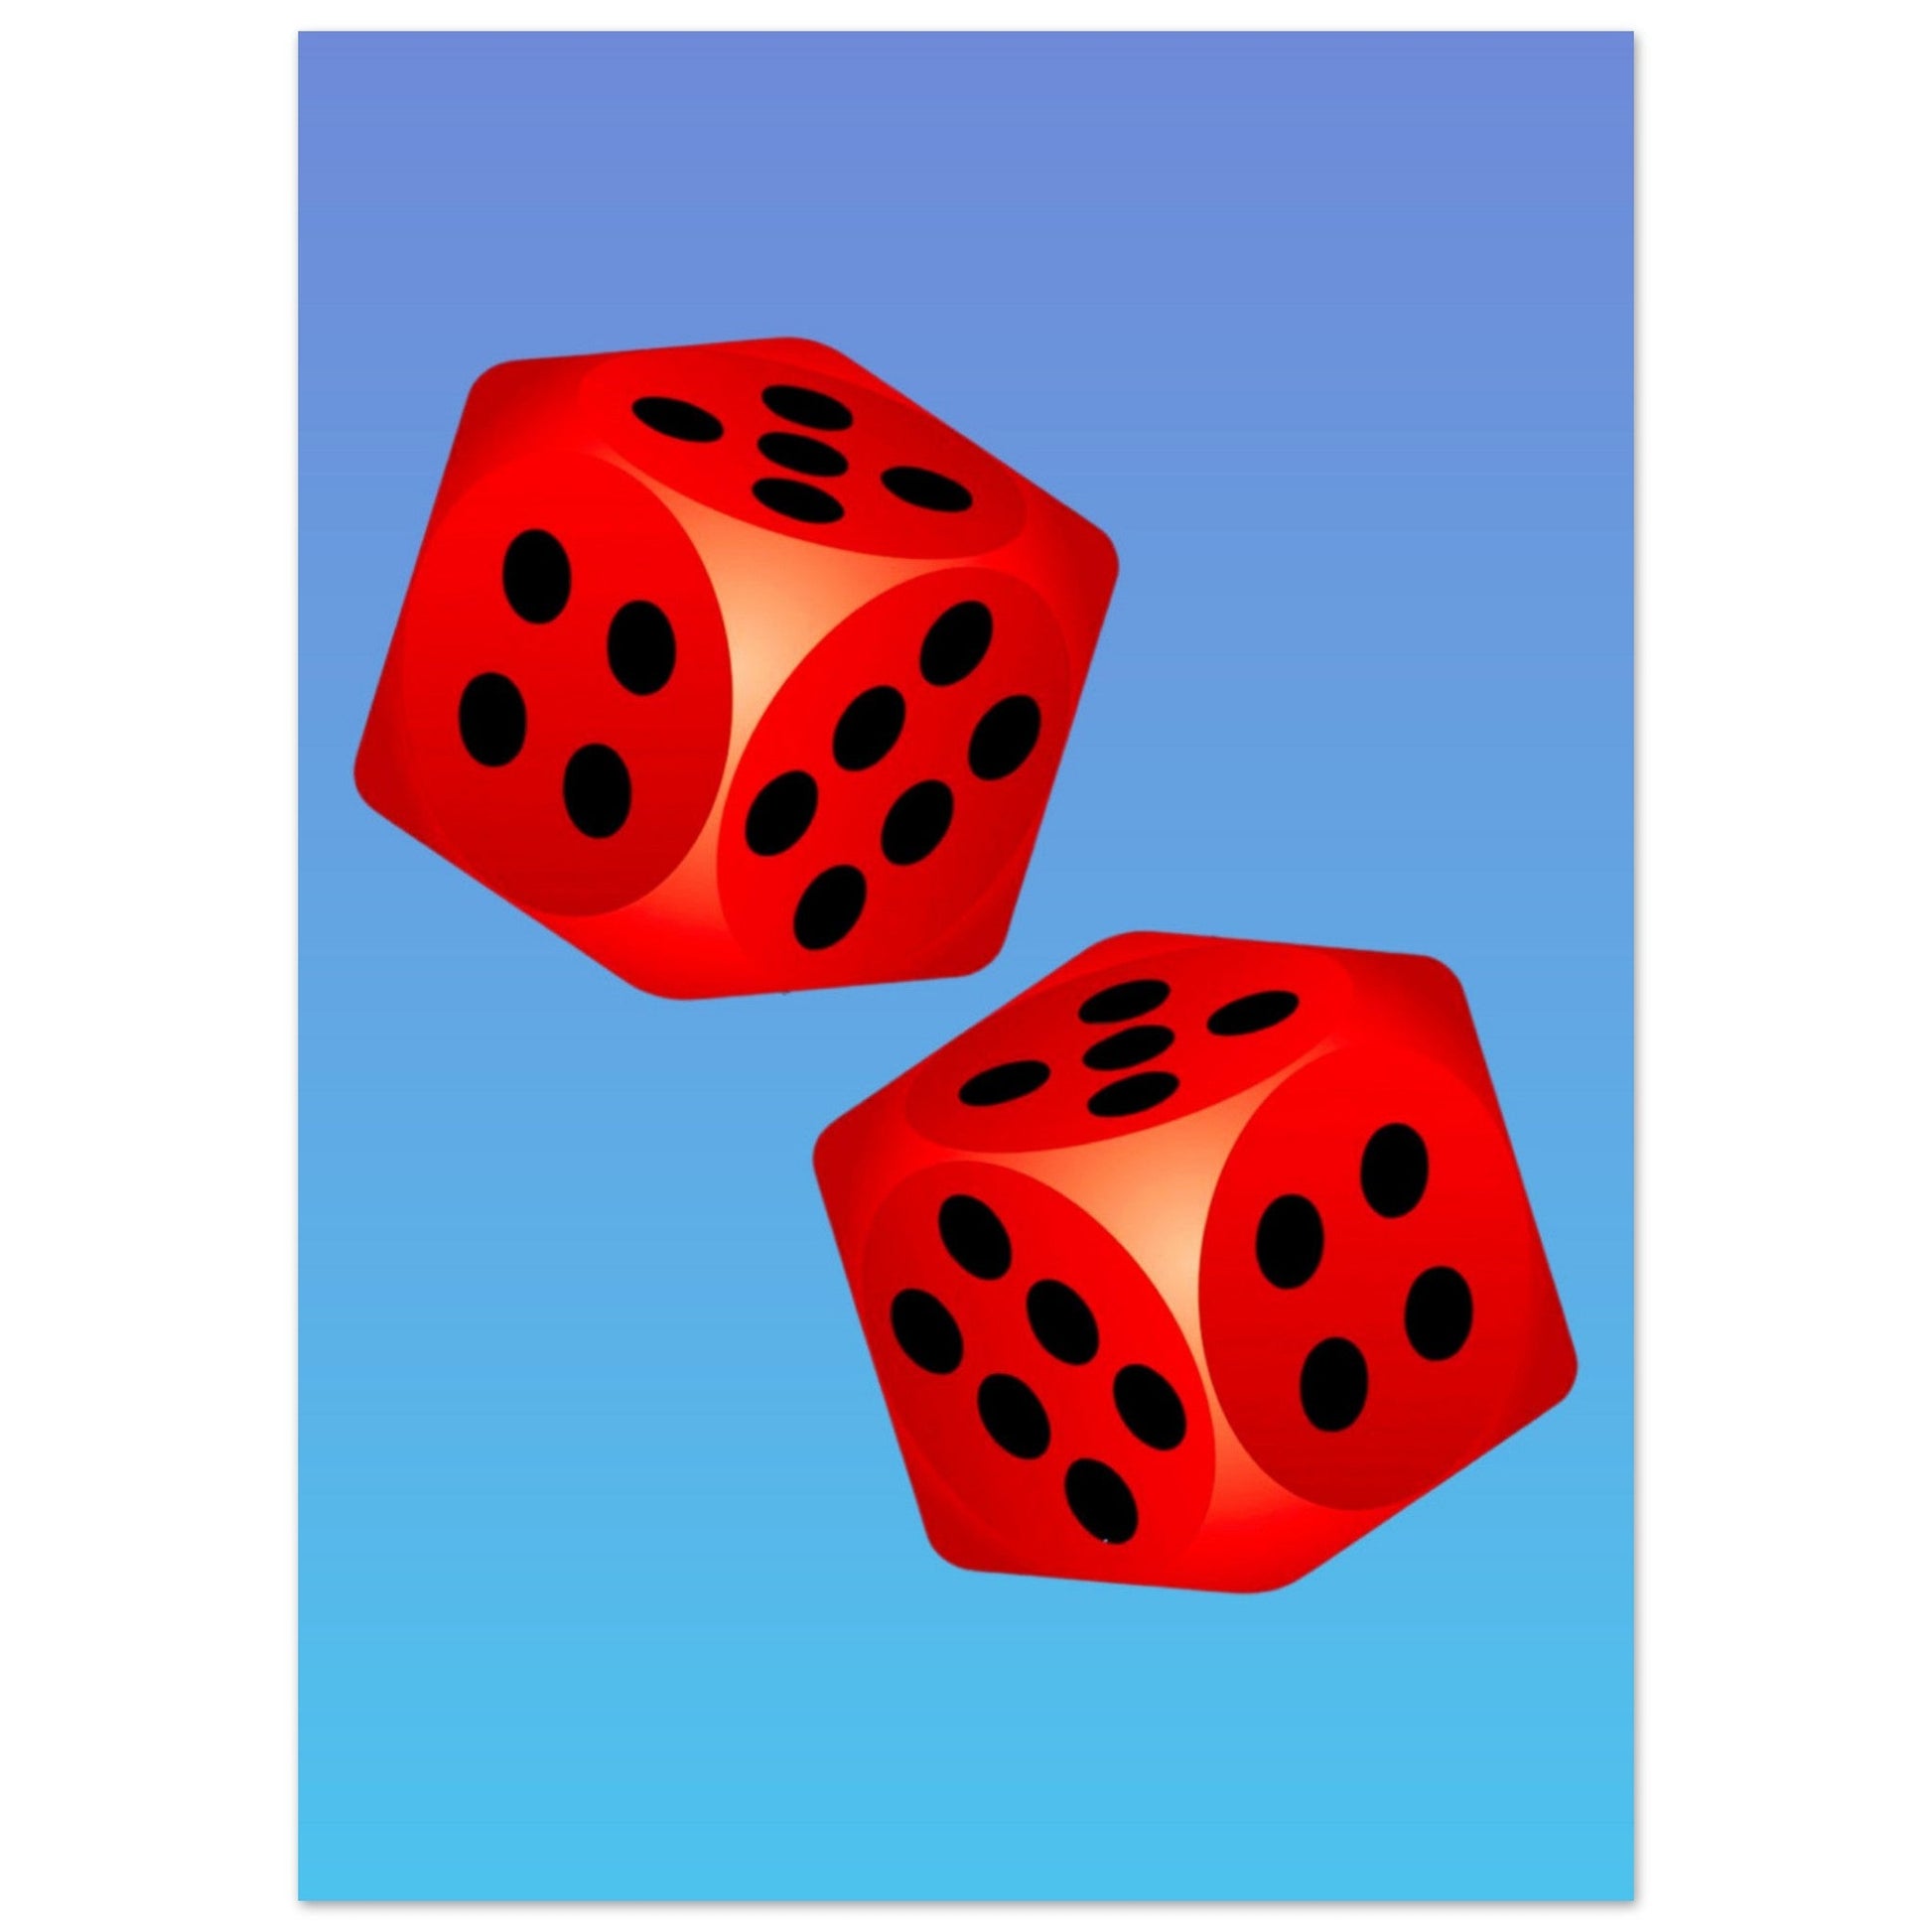 Lucky Me, Luck Me Art Print, Red and Blue Motif, Red Dot Dice, #illieeart